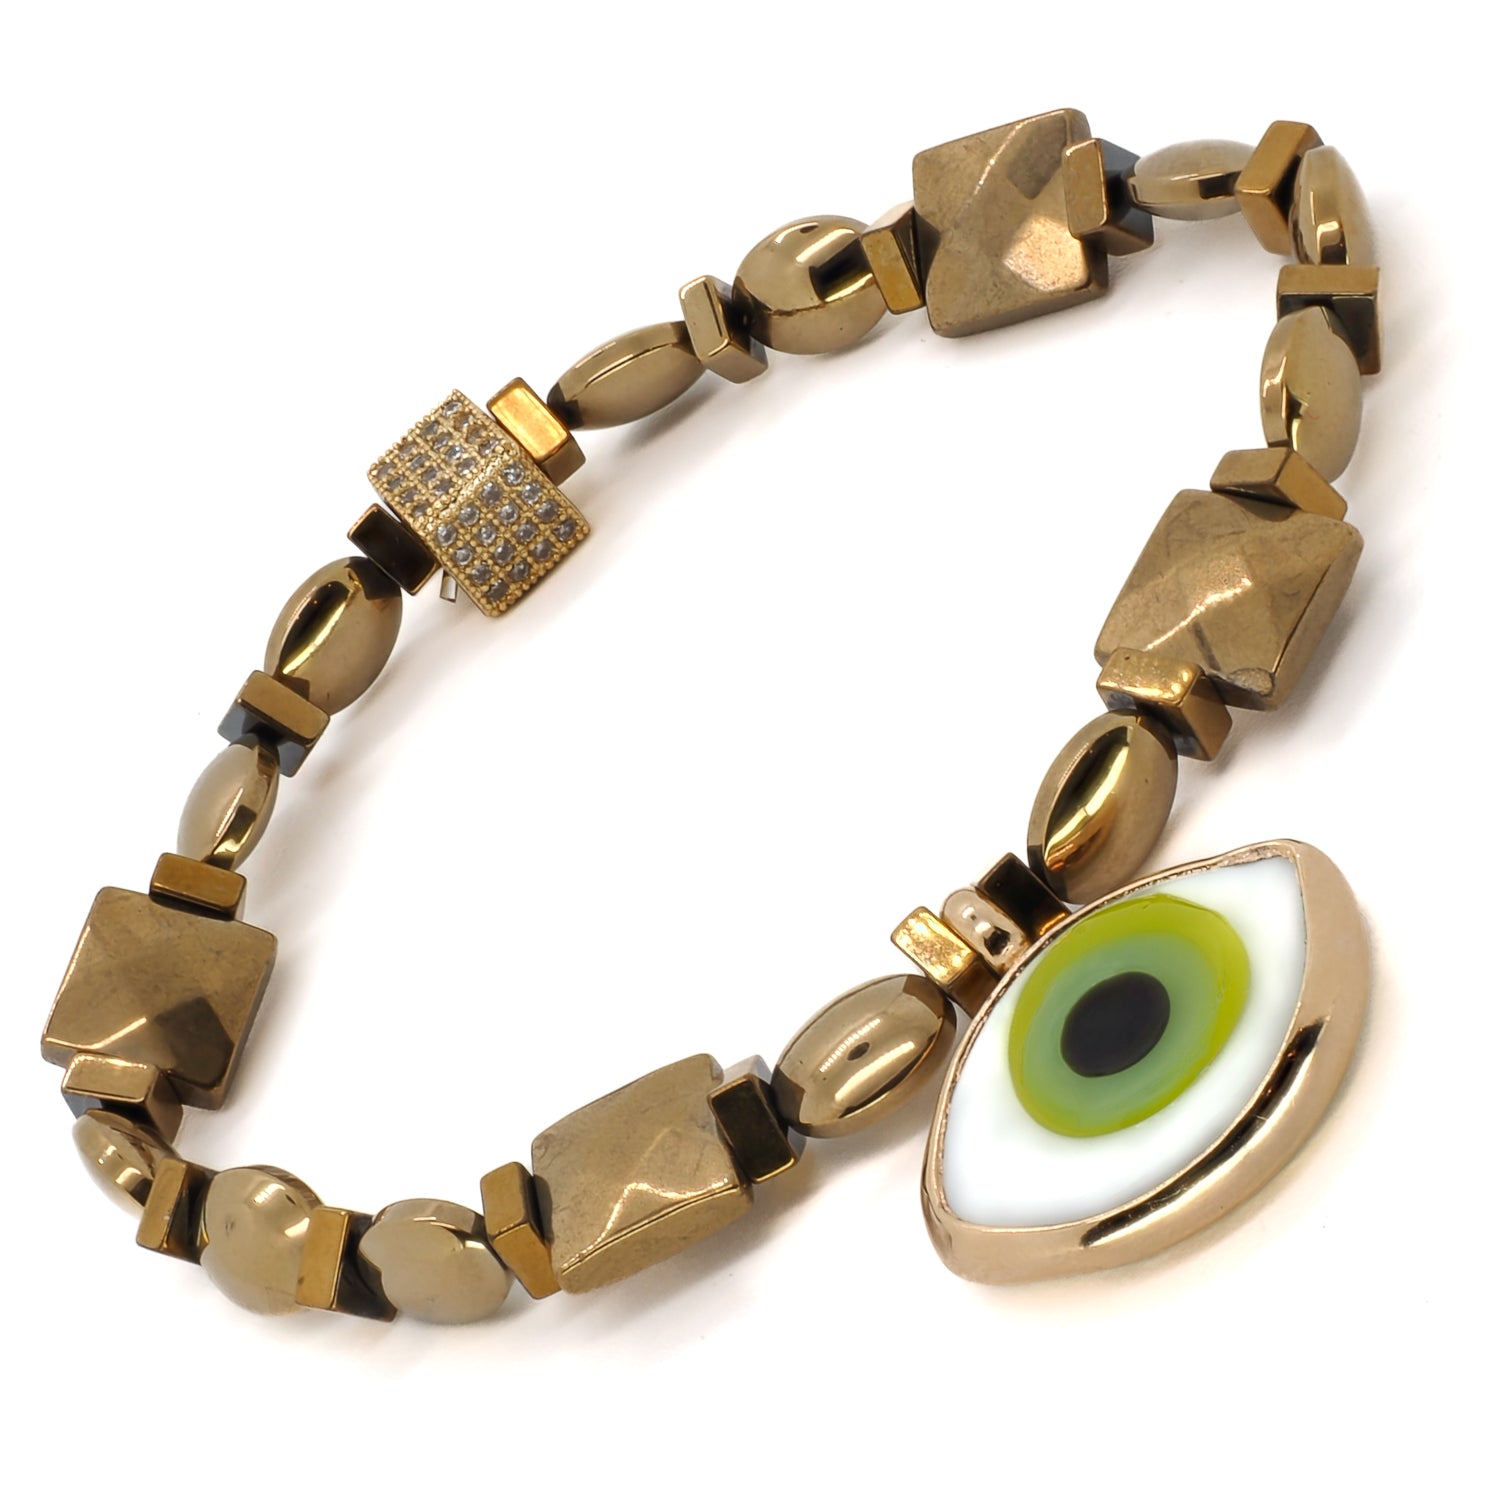 The 18K gold plated Evil eye charm enhances the bracelet with its symbolic meaning of protection and positive energy.